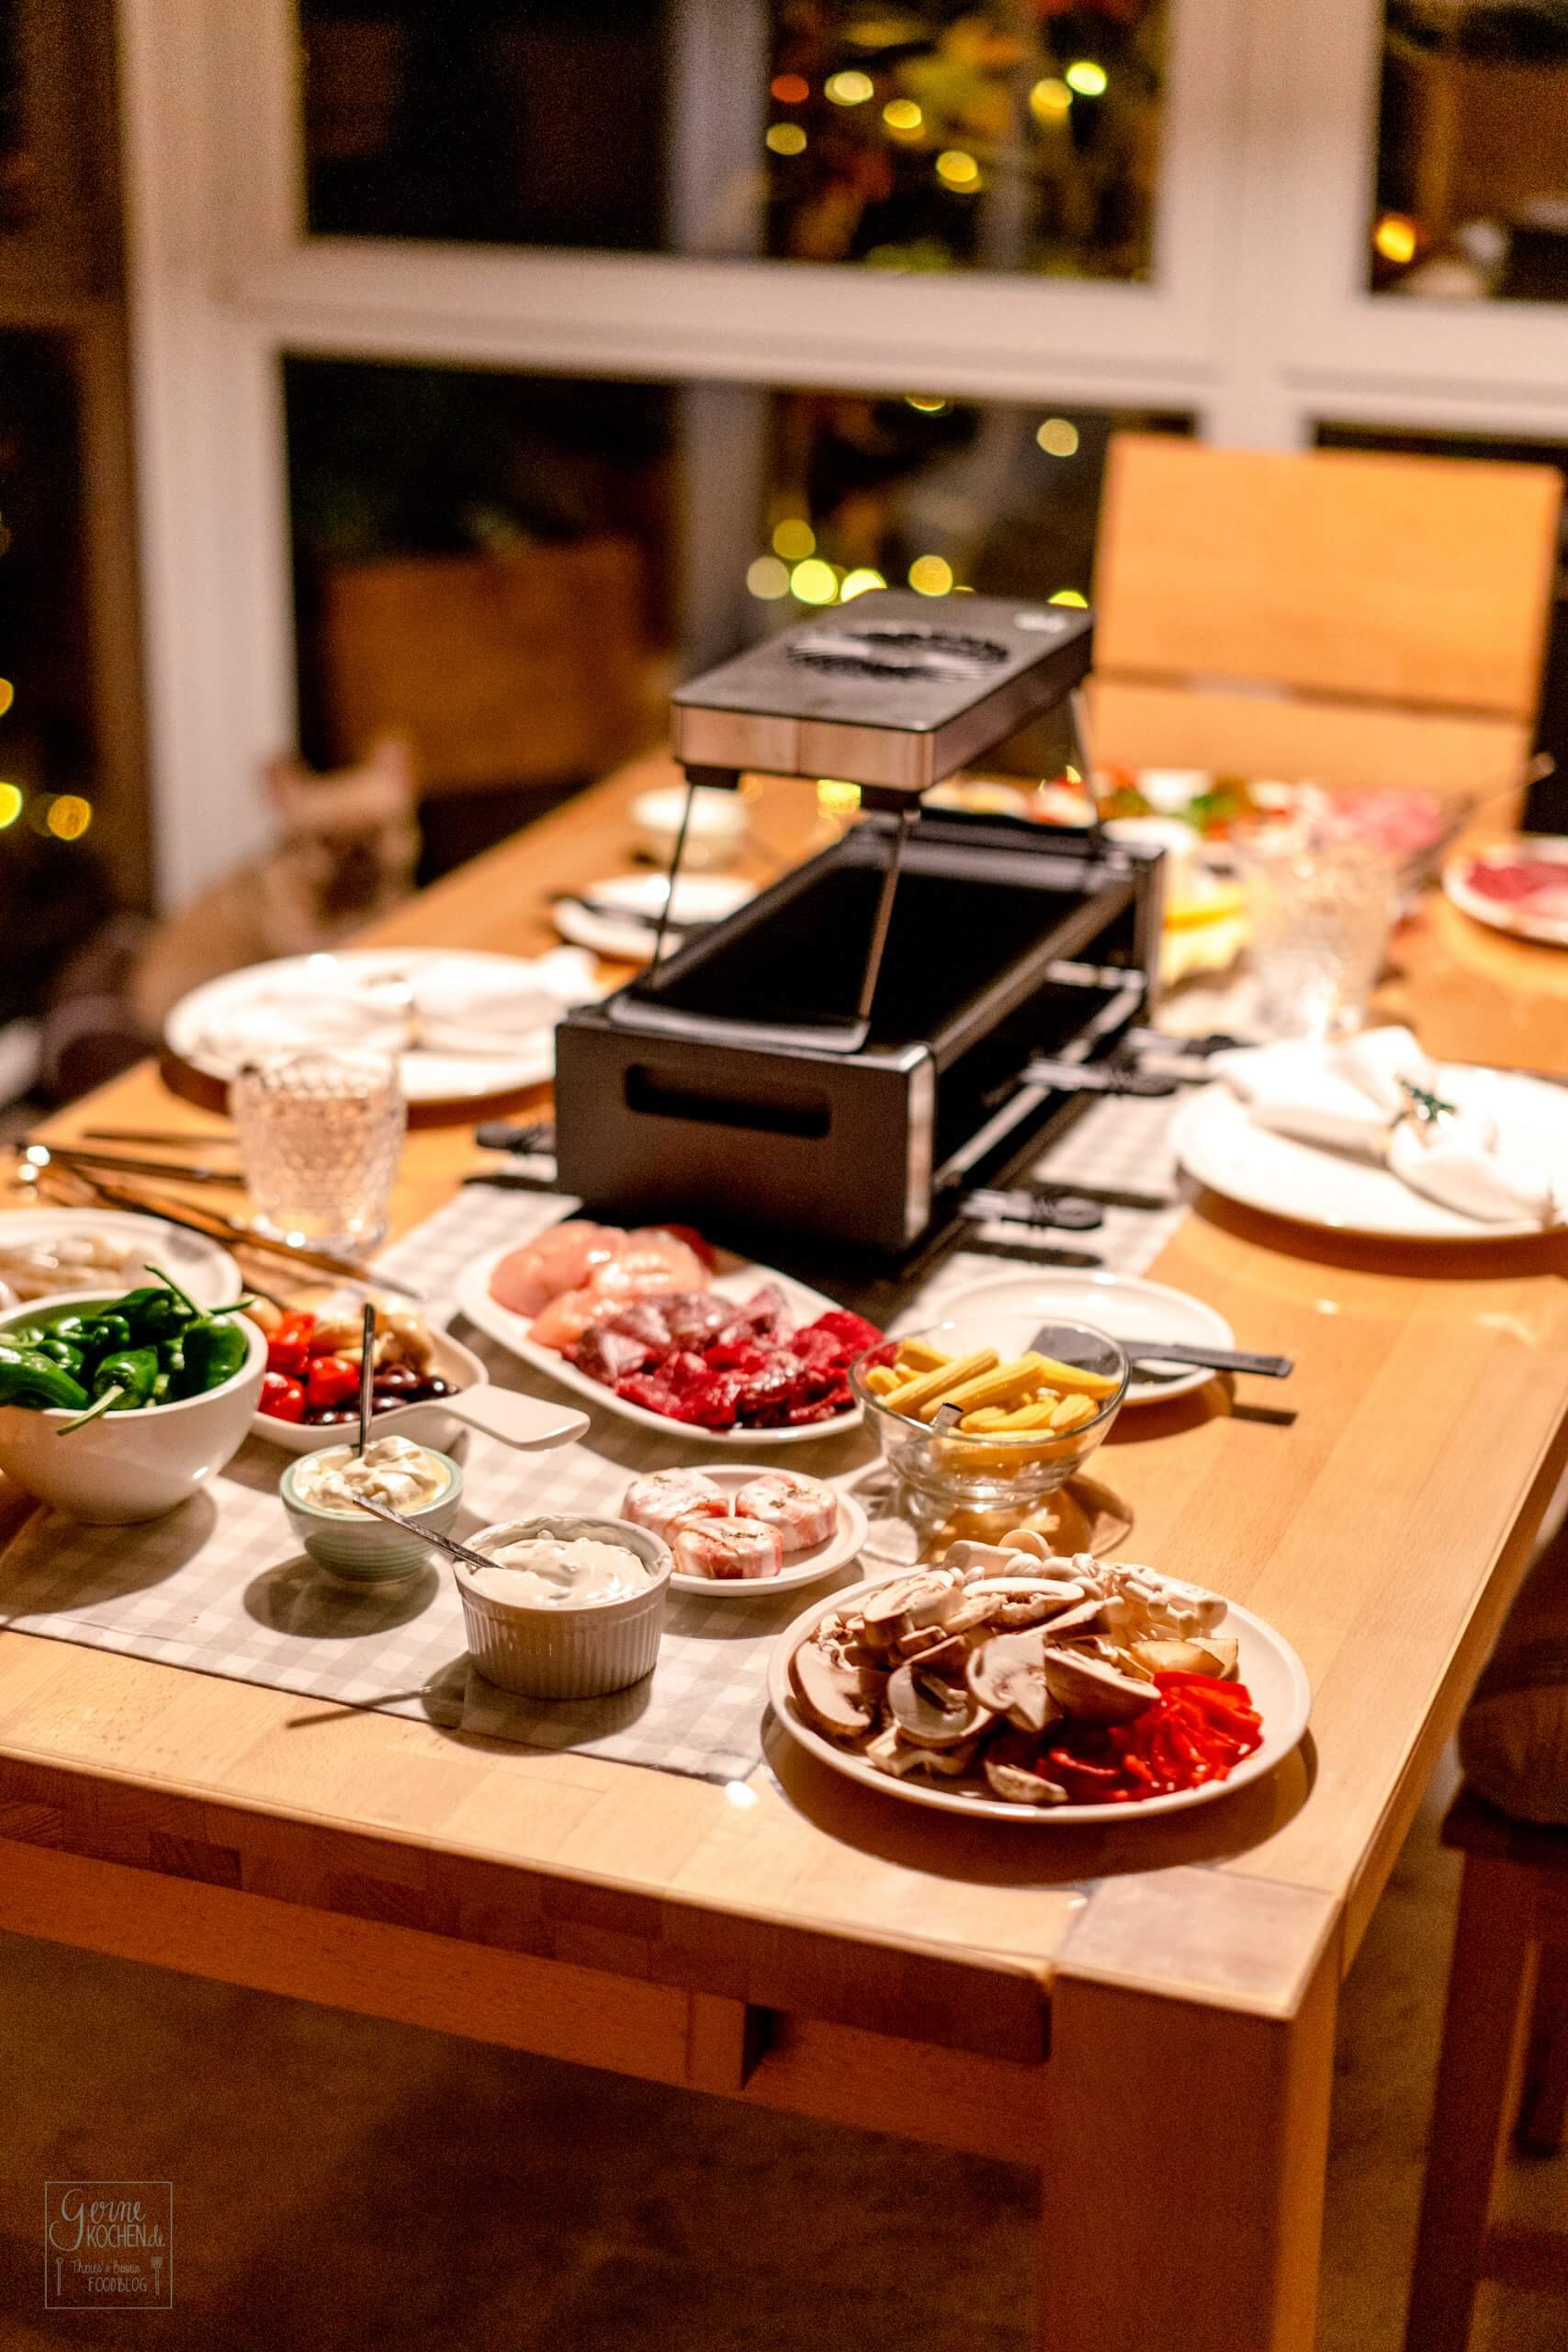 Unser ultimativer Raclette Guide